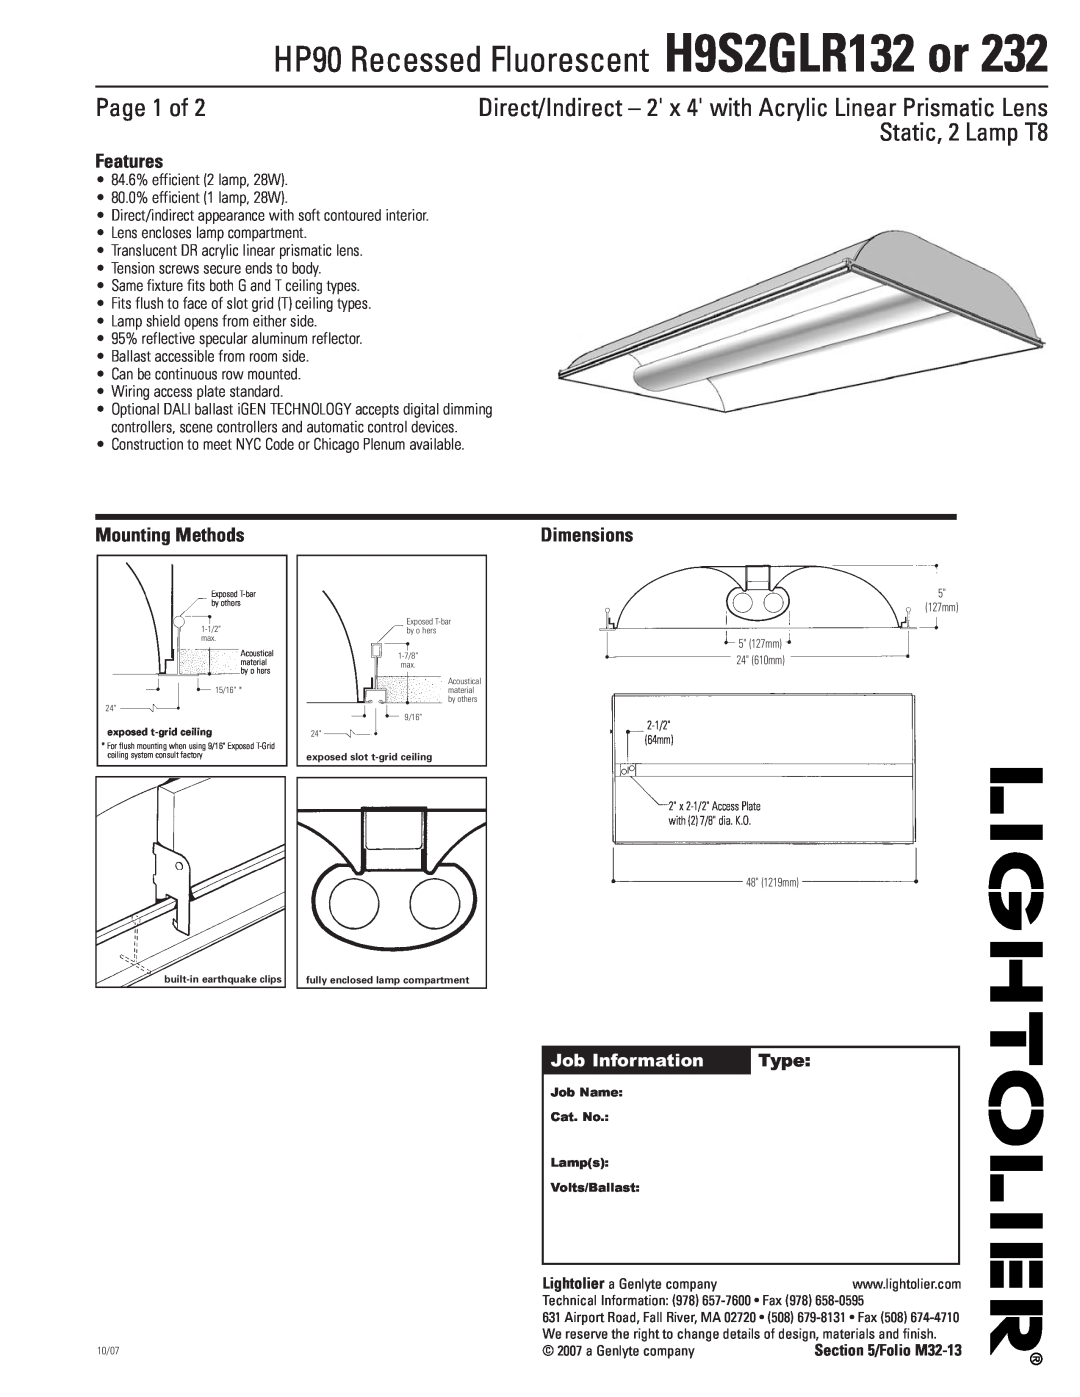 Lightolier H9S2GLR232 dimensions HP90 Recessed Fluorescent H9S2GLR132 or, Page 1 of, Static, 2 Lamp T8, Features, Type 